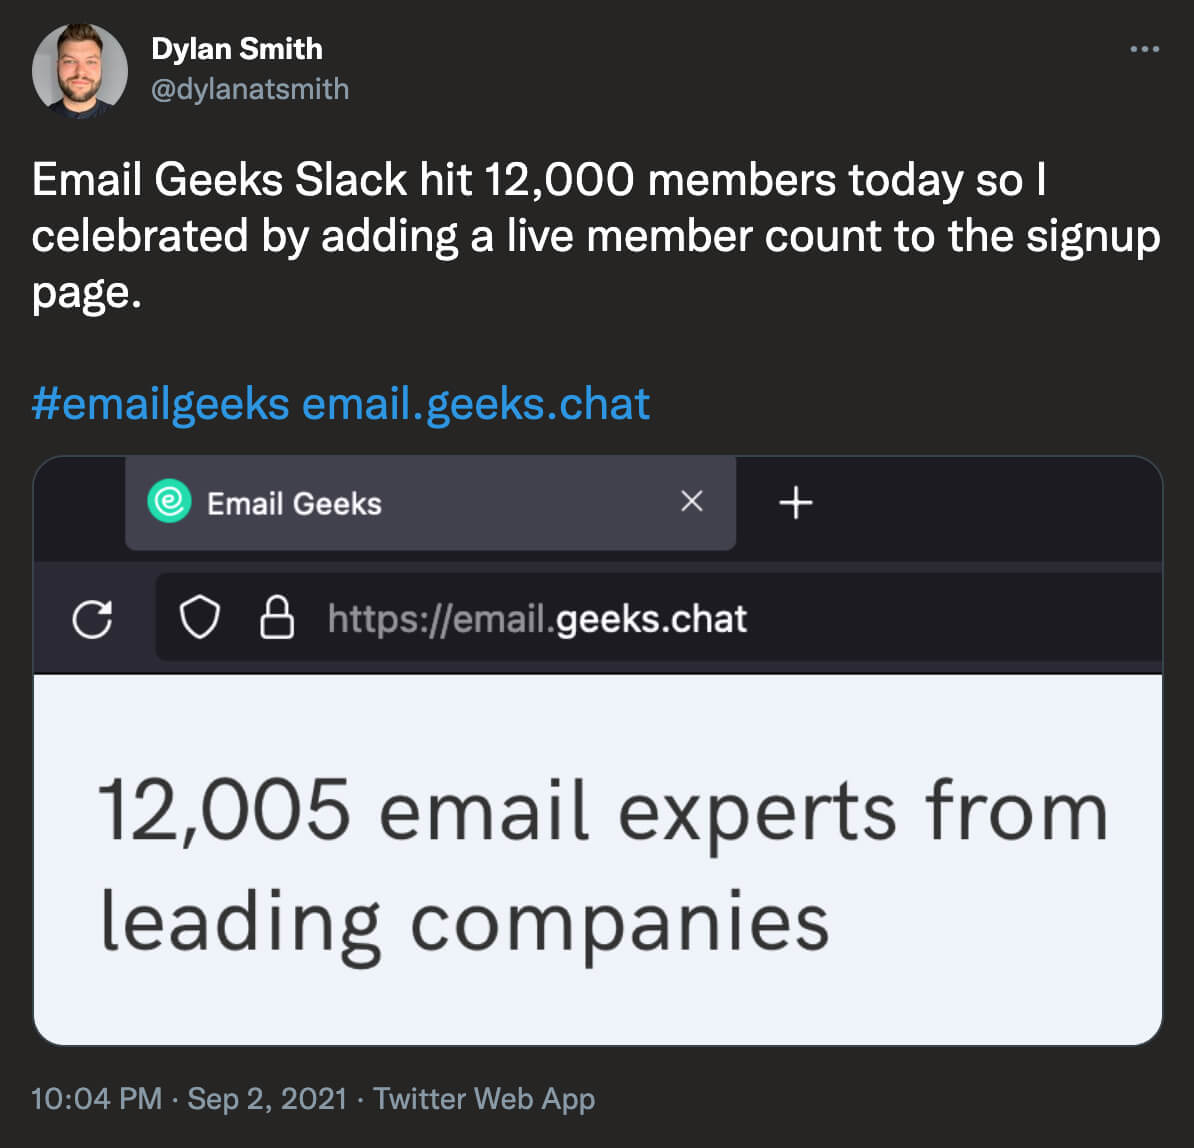 @dylantsmith on Twitter: Email Geeks Slack hit 12,000 members today so I celebrated by adding a live member count to the signup page. #emailgeeks email.geeks.chat